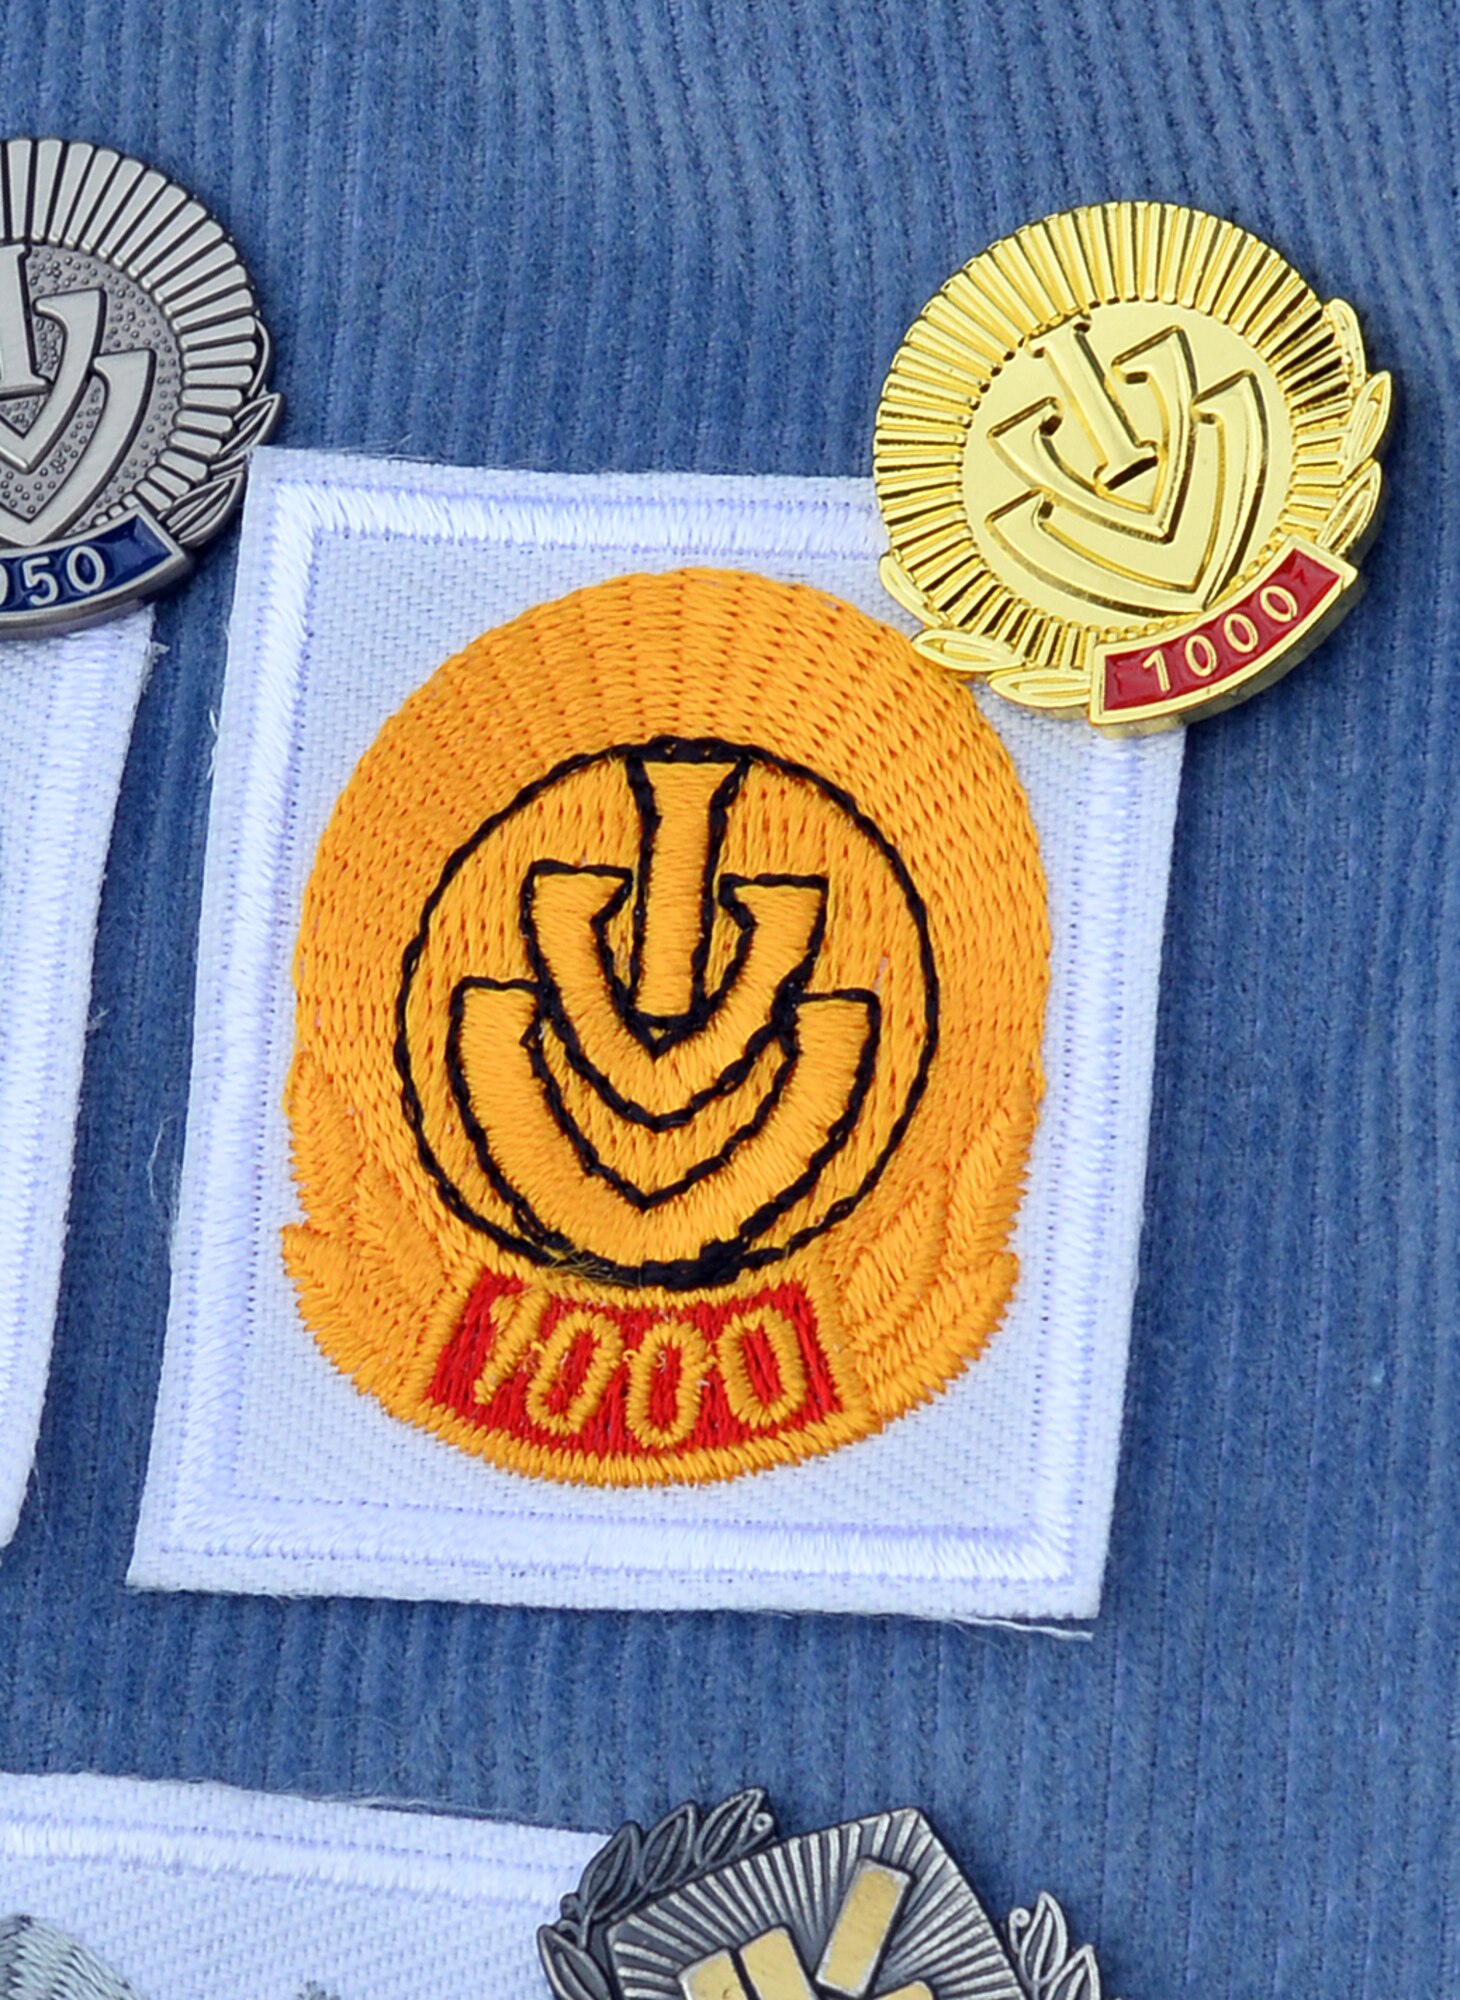 The official 1,000th event Internationaler Volkssportverband, IVV, pin and patch adorn a rectangular swatch of fabric decorated with several other milestone achievements in Volksmarching, Nov. 6, Offutt Air Force Base, Neb.  Volkmarching is a non-competitive 3.1 or 6.2 mile walk held at sanctioned IVV events around the world.  The United States volksport clubs fall under the American Volkssport Association.  (U.S. Air Force photo by Josh Plueger/Released)